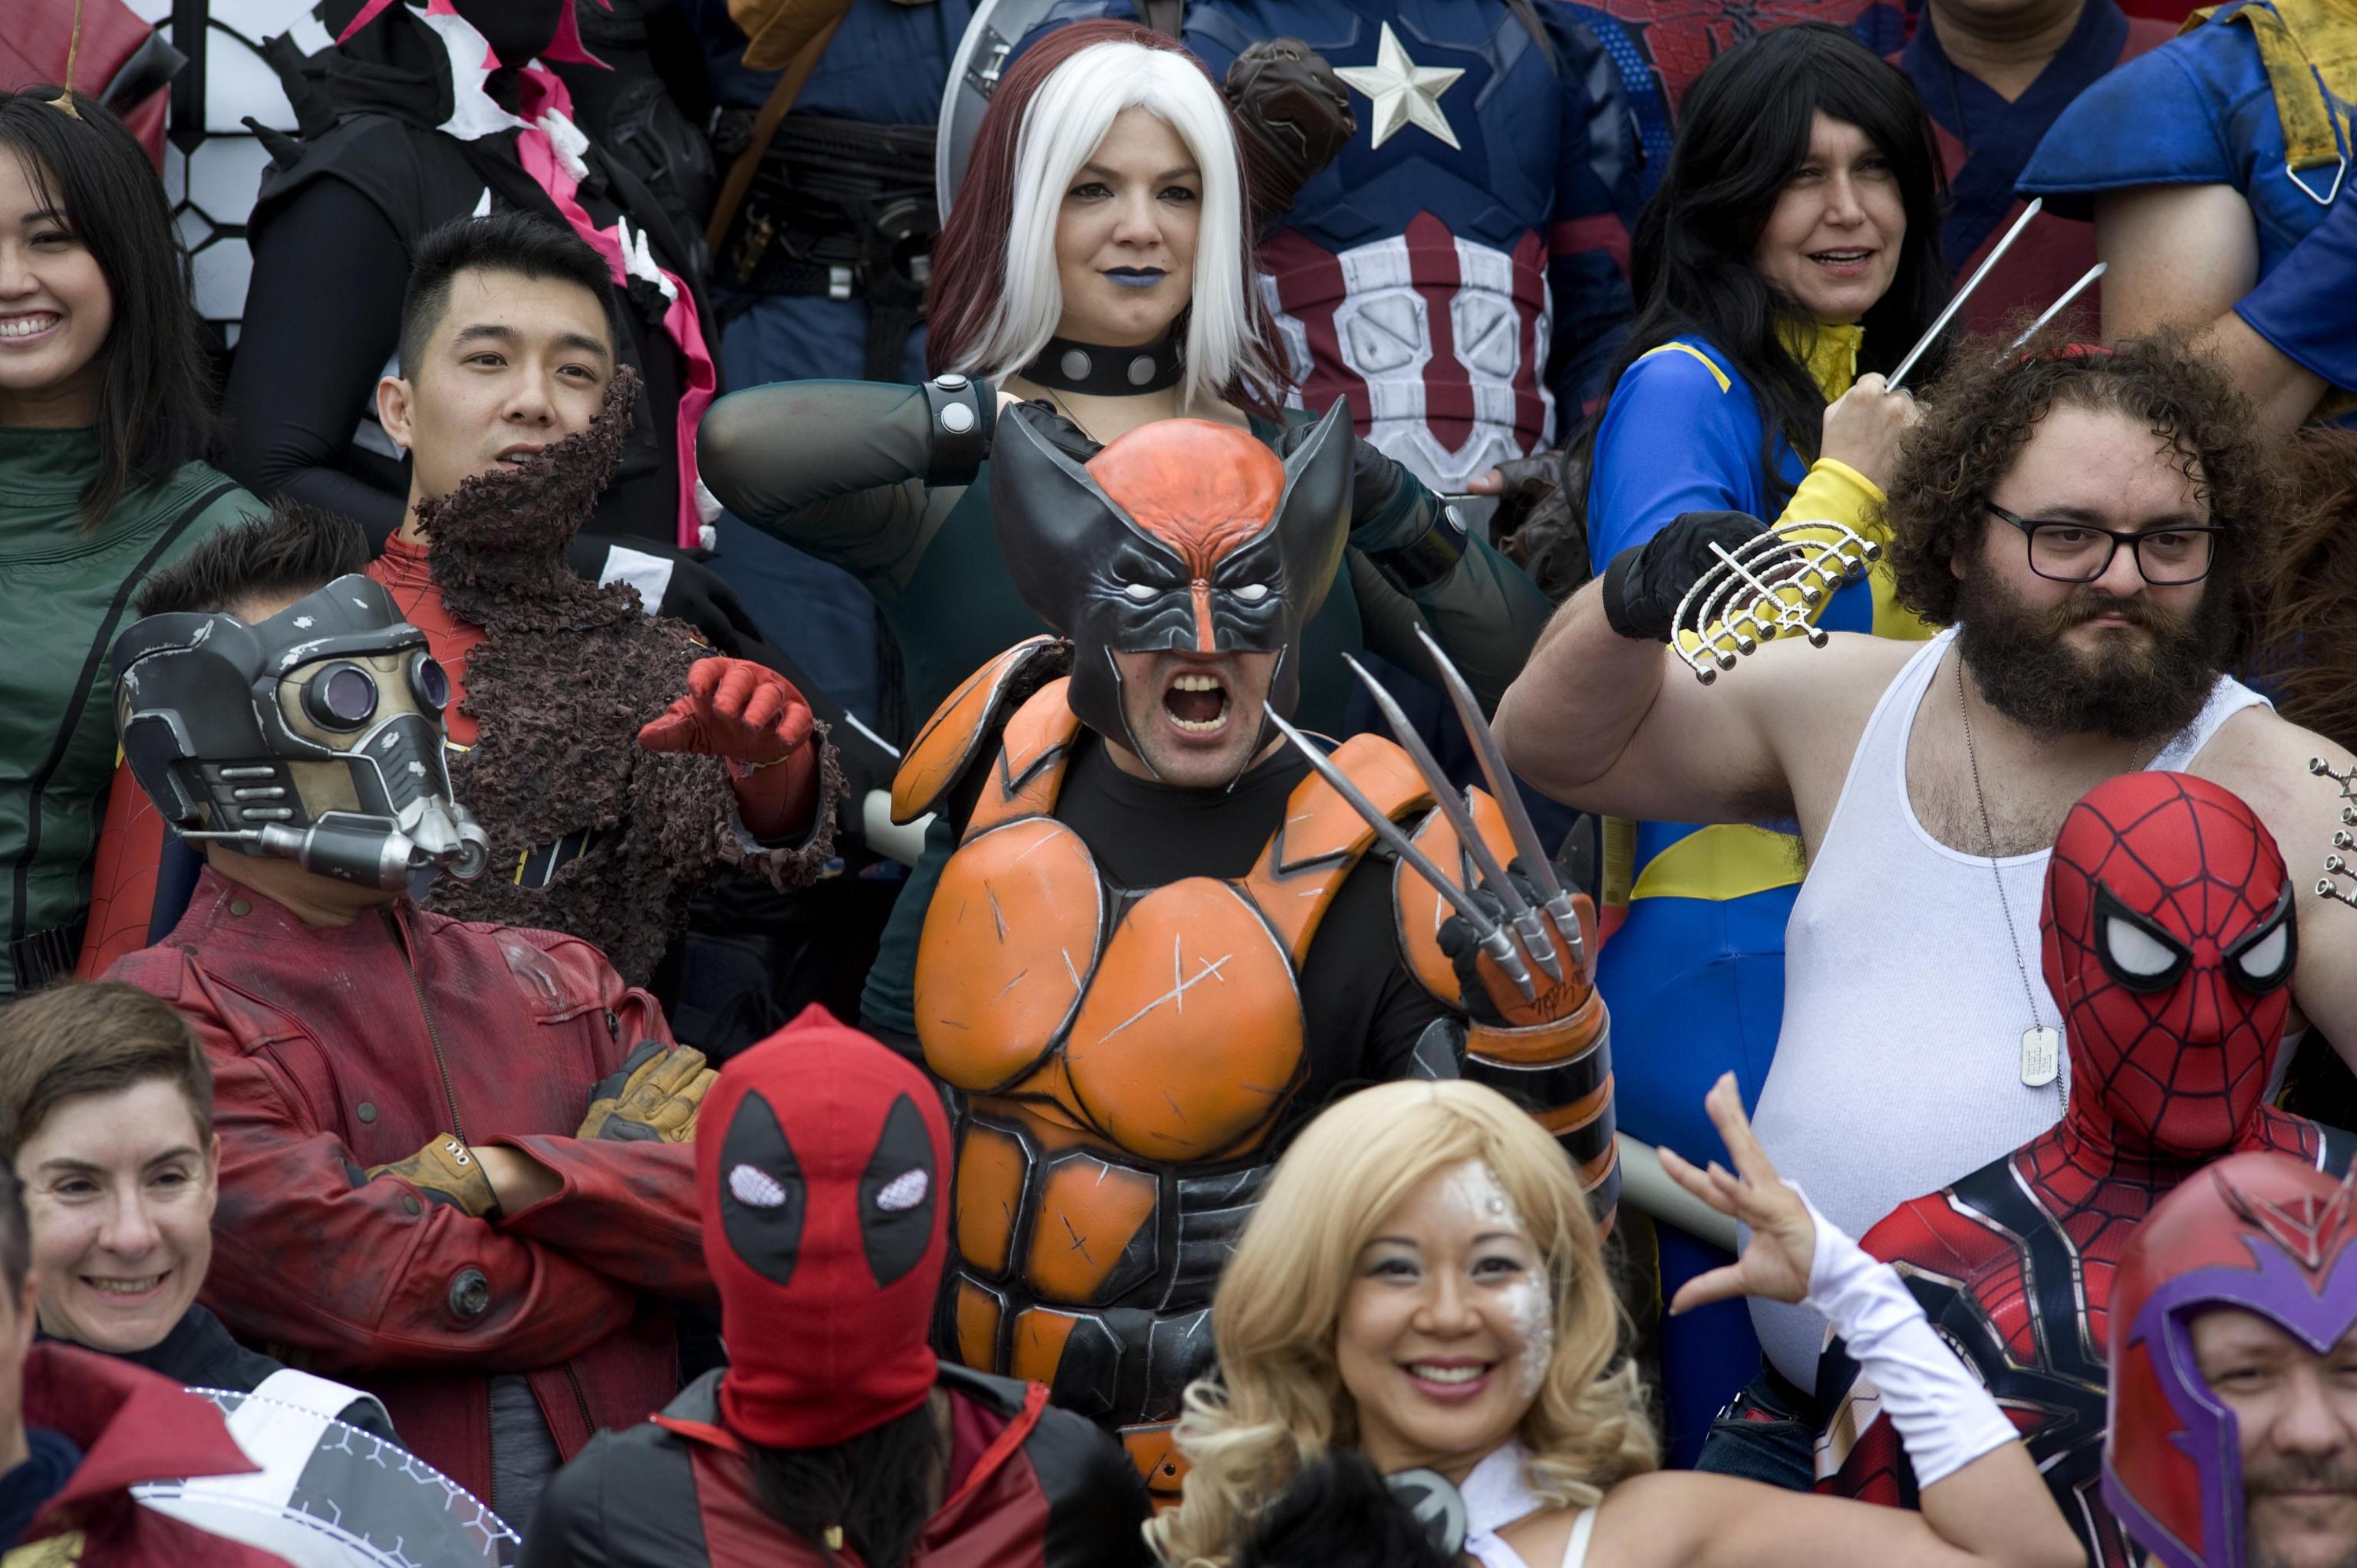 epa06901775 eople participate in a Marvel Comics photo shoot on the second day of Comic Con International in San Diego, California, USA, 20 July 2018. People dressed as Marvel Comics characters or their alterations of the characters gathered for a series of group photos.  EPA/DAVID MAUNG